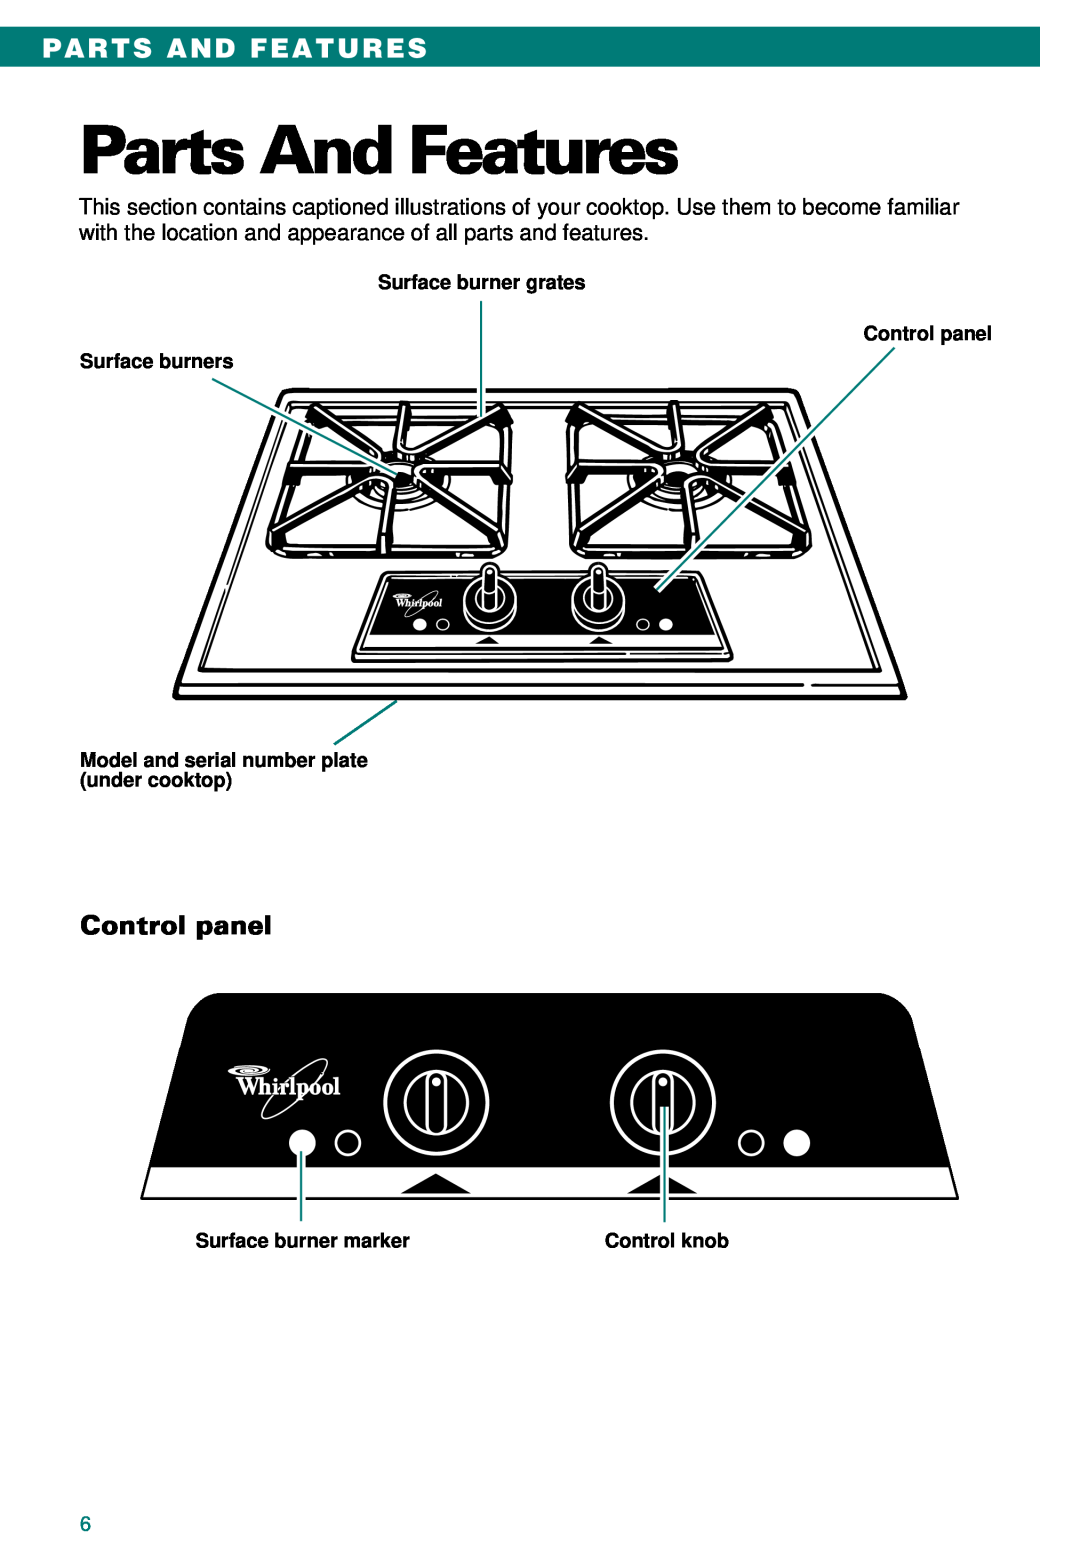 Whirlpool SC8100XA Parts And Features, Control panel, Surface burner grates, Surface burners, Surface burner marker 